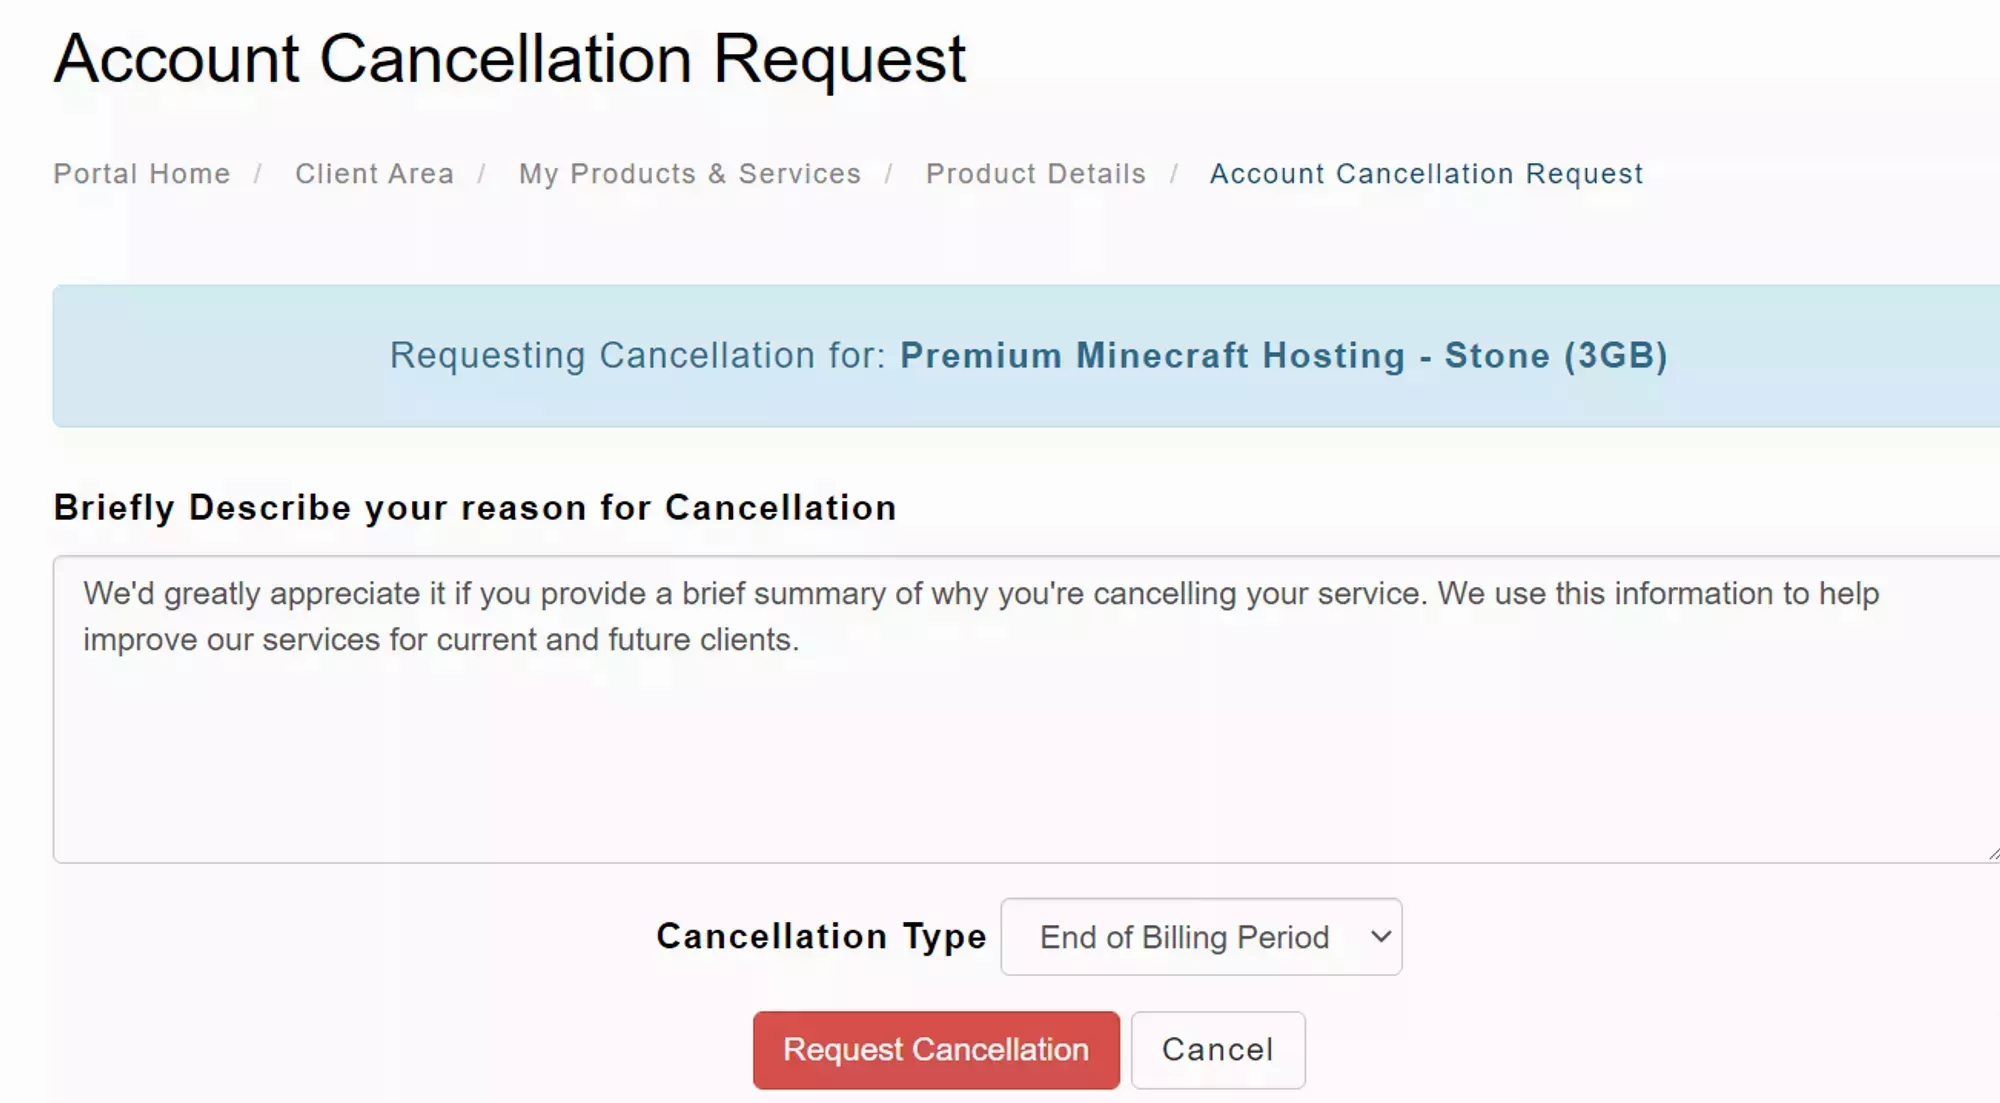 The service cancellation confirmation page